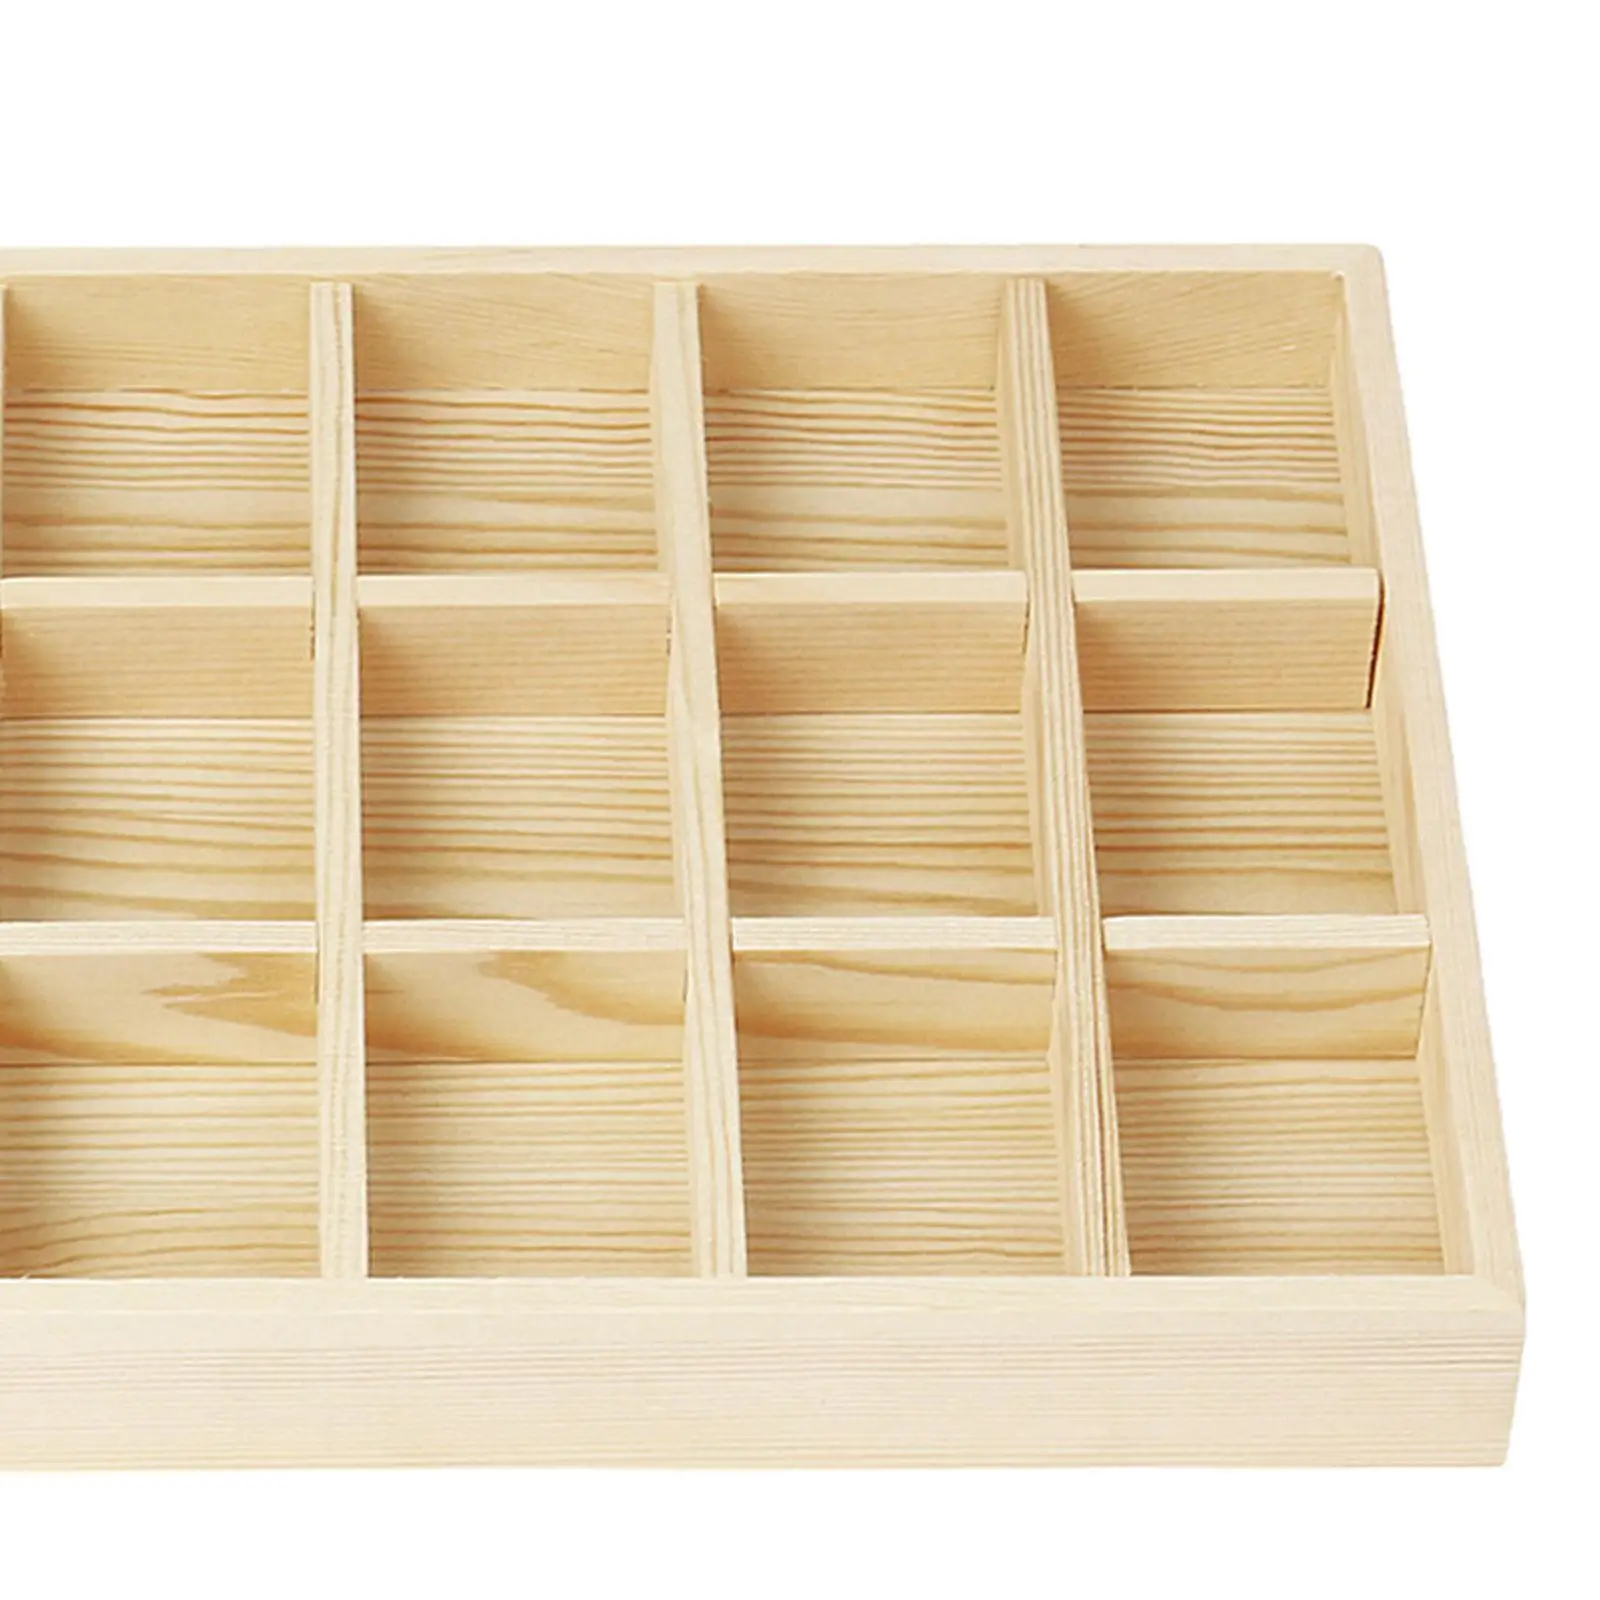 Jewelry Tray Jewelry Organizer Wooden Simple Earrings Jewellery Storage,Jewelry Display Case for Countertop Dresser Dorm,Home